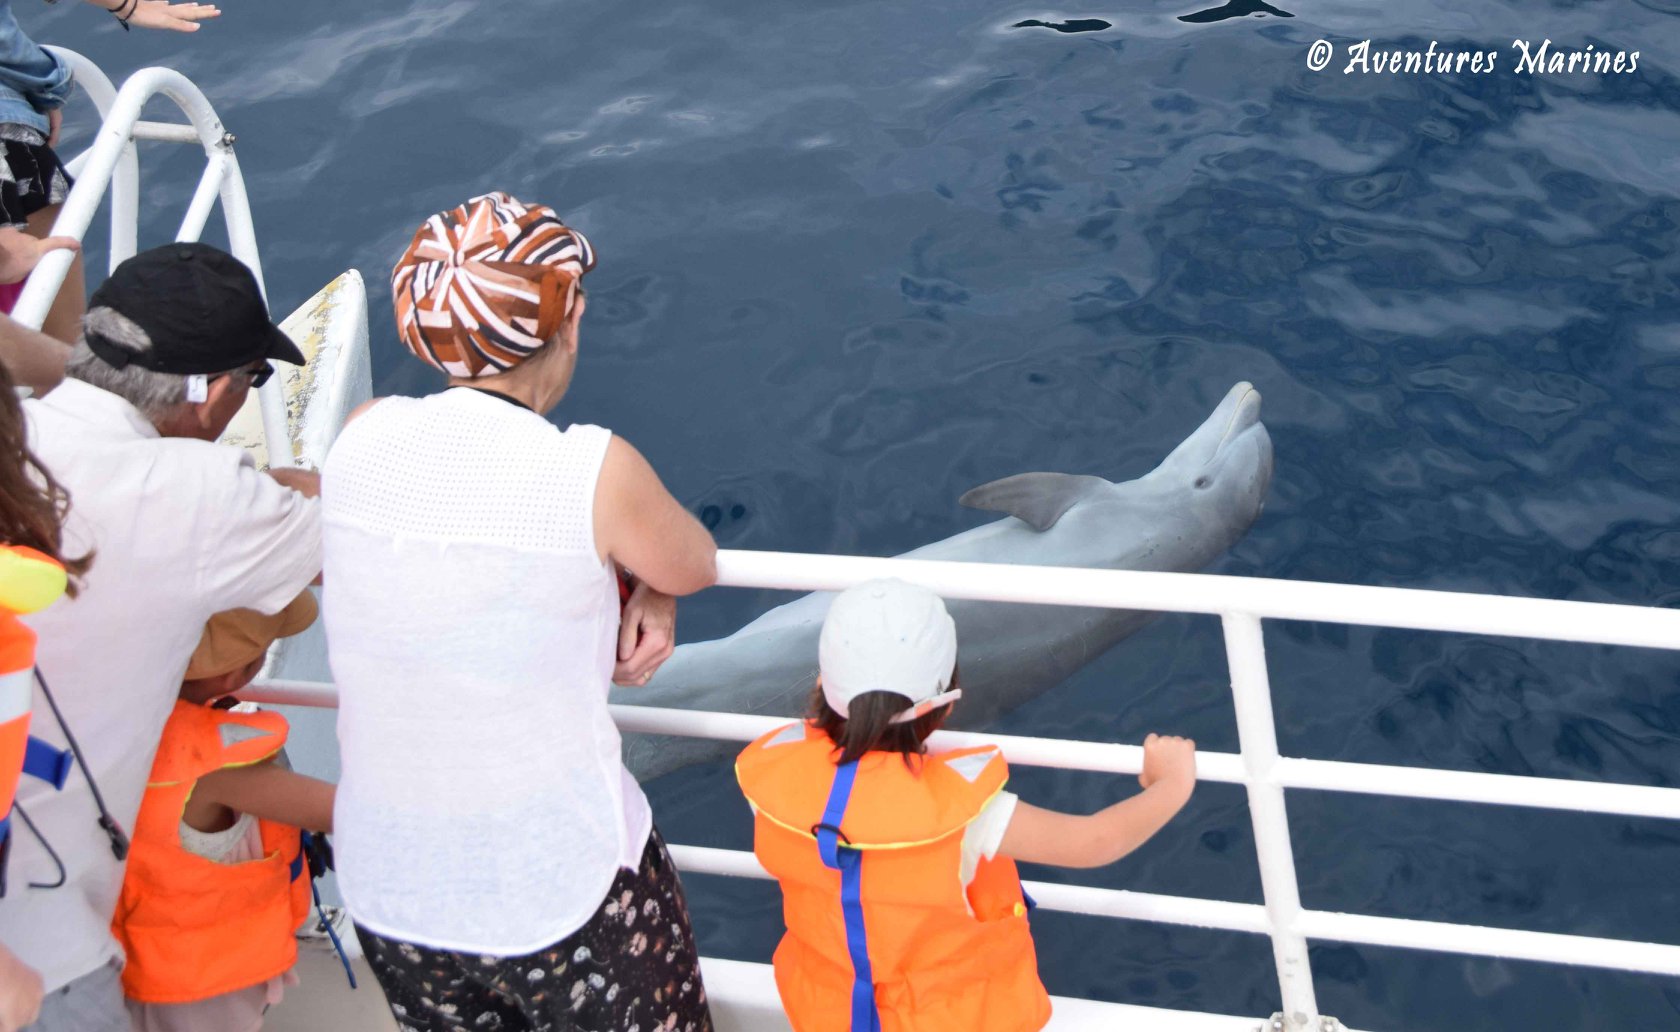 Aventures Marines Offer Dolphin, Sperm whale and Whale watching.